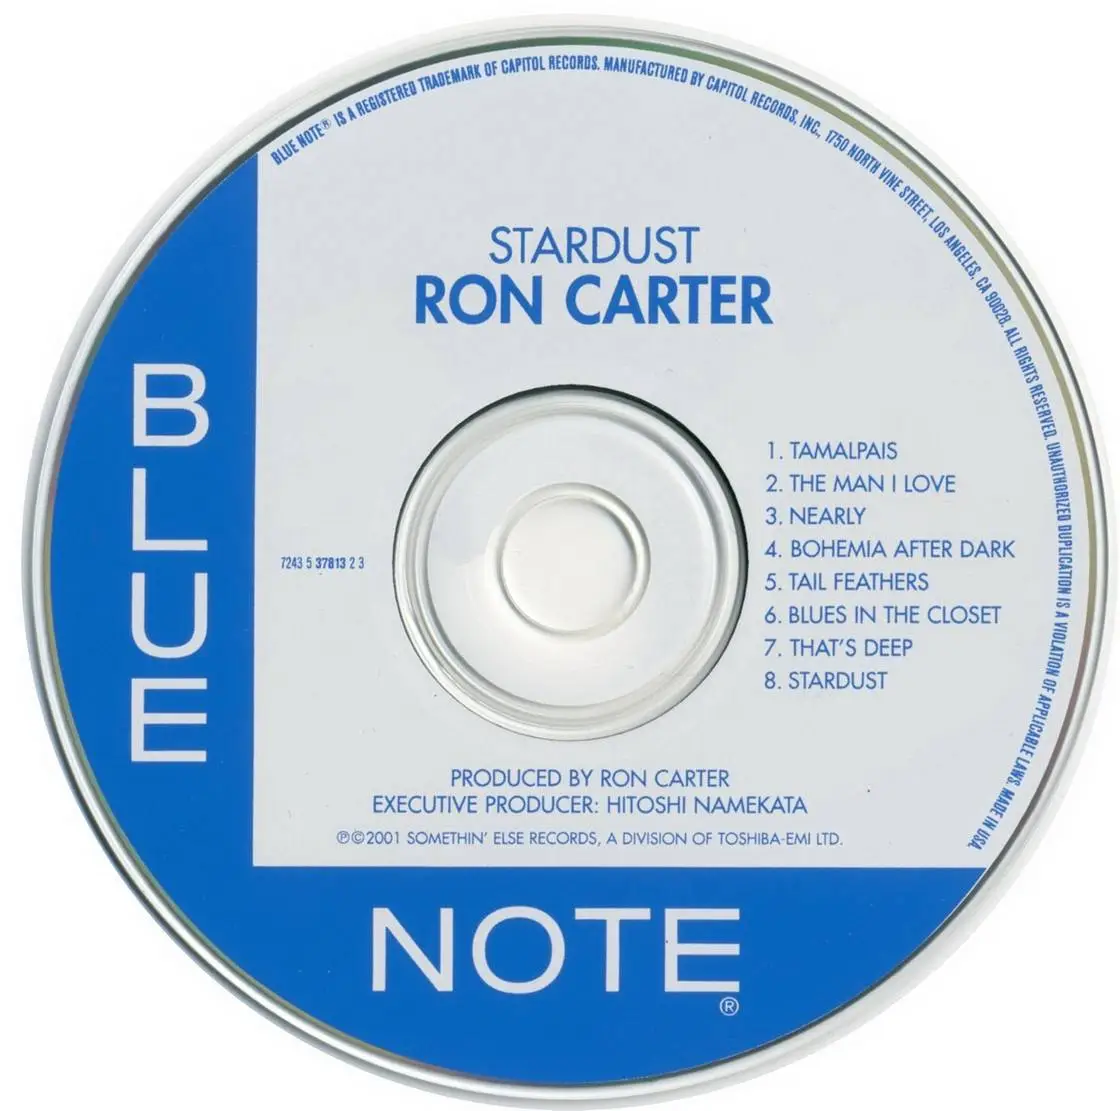 Ron Carter - Stardust (2001) {Blue Note 7243 5 37813 2 3} / AvaxHome